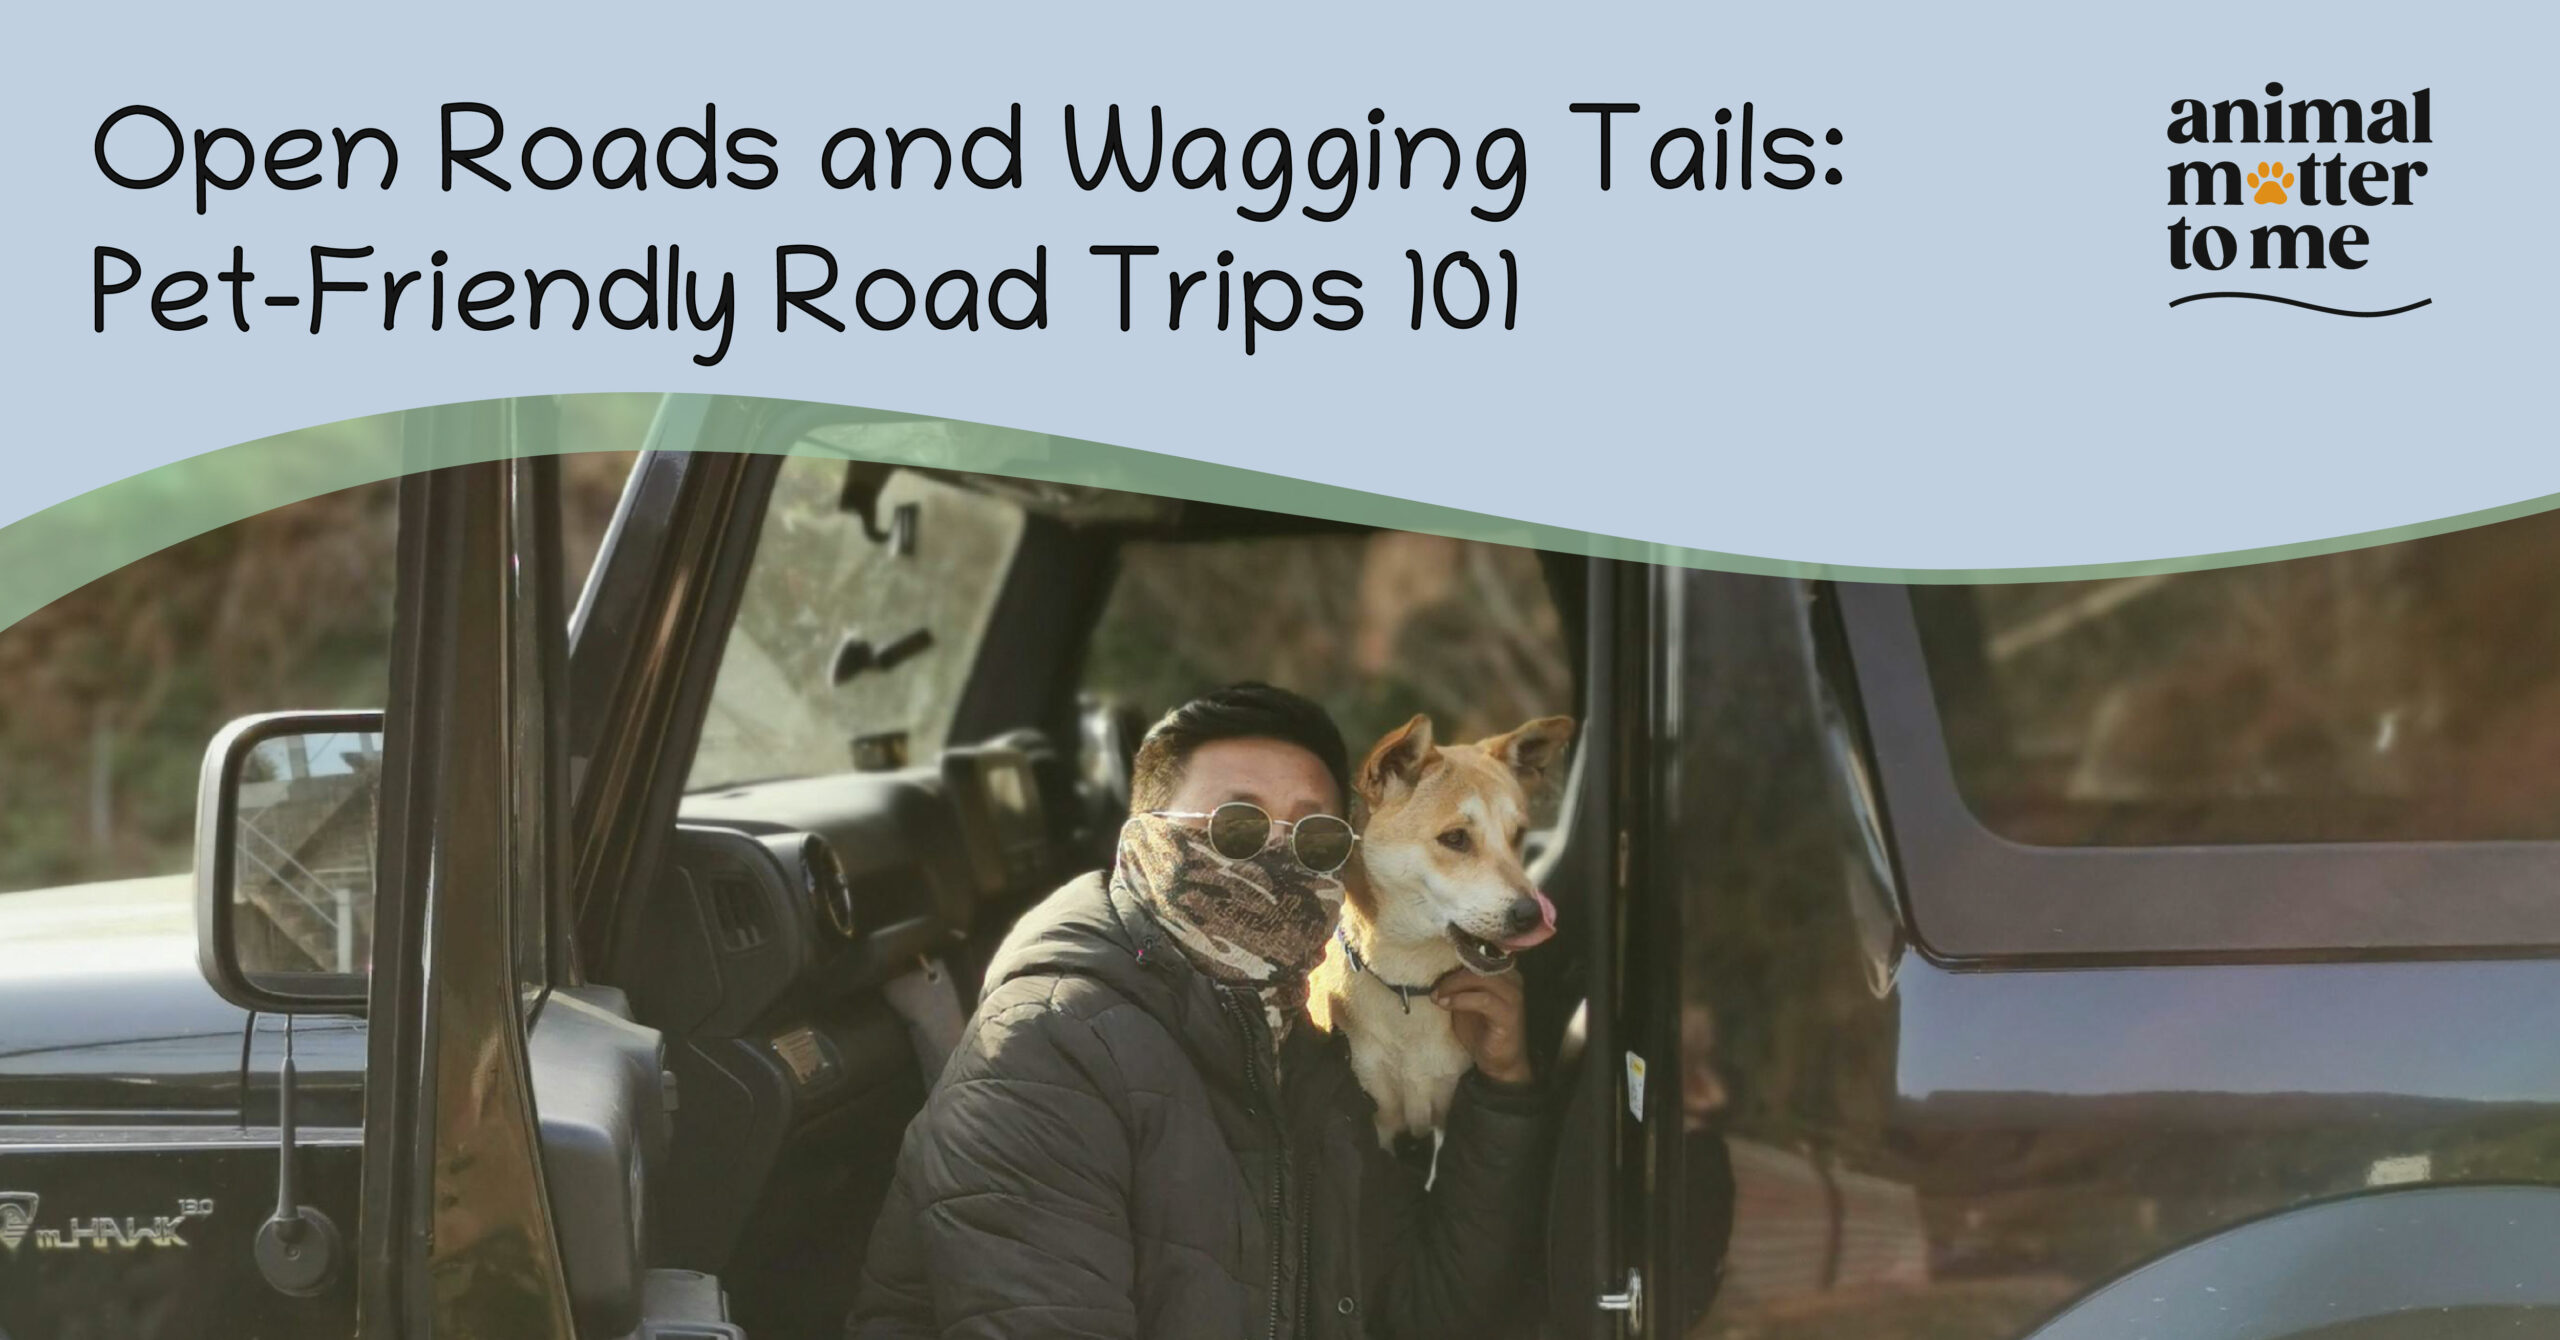 Open Roads and Wagging Tails: Pet-Friendly Road Trips 101